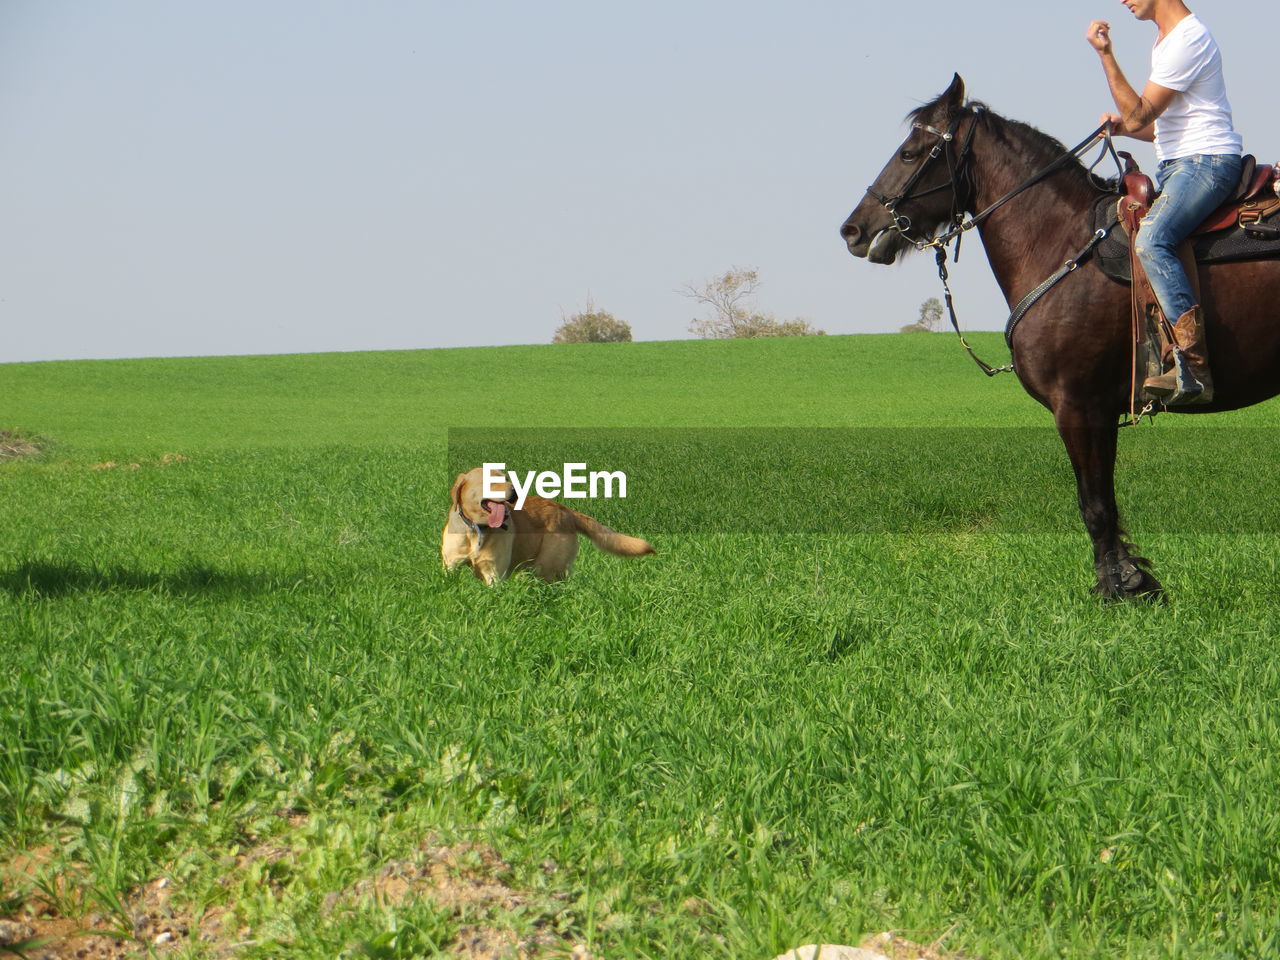 Low section of mid adult woman riding horse on grassy field by dog against clear sky